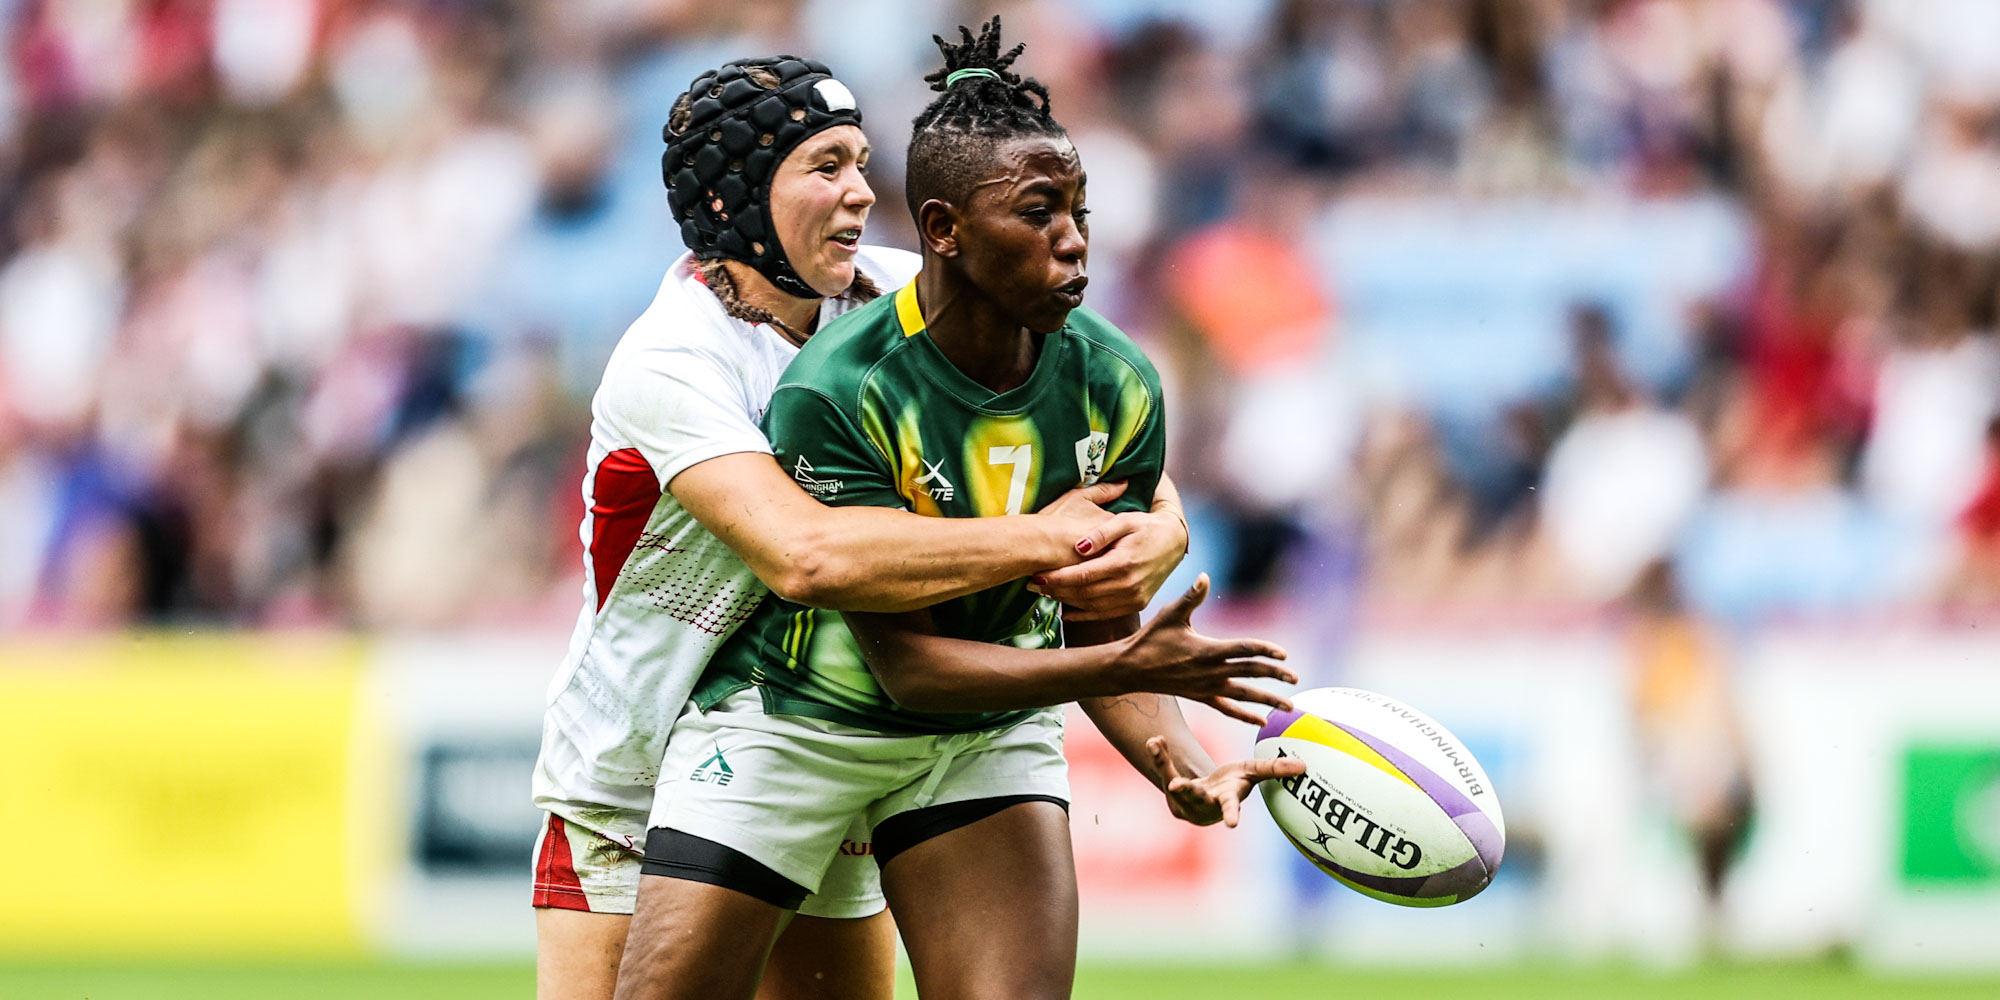 Nontuthuko Shongwe is wrapped up by an England defender in their fifth-place semi-final